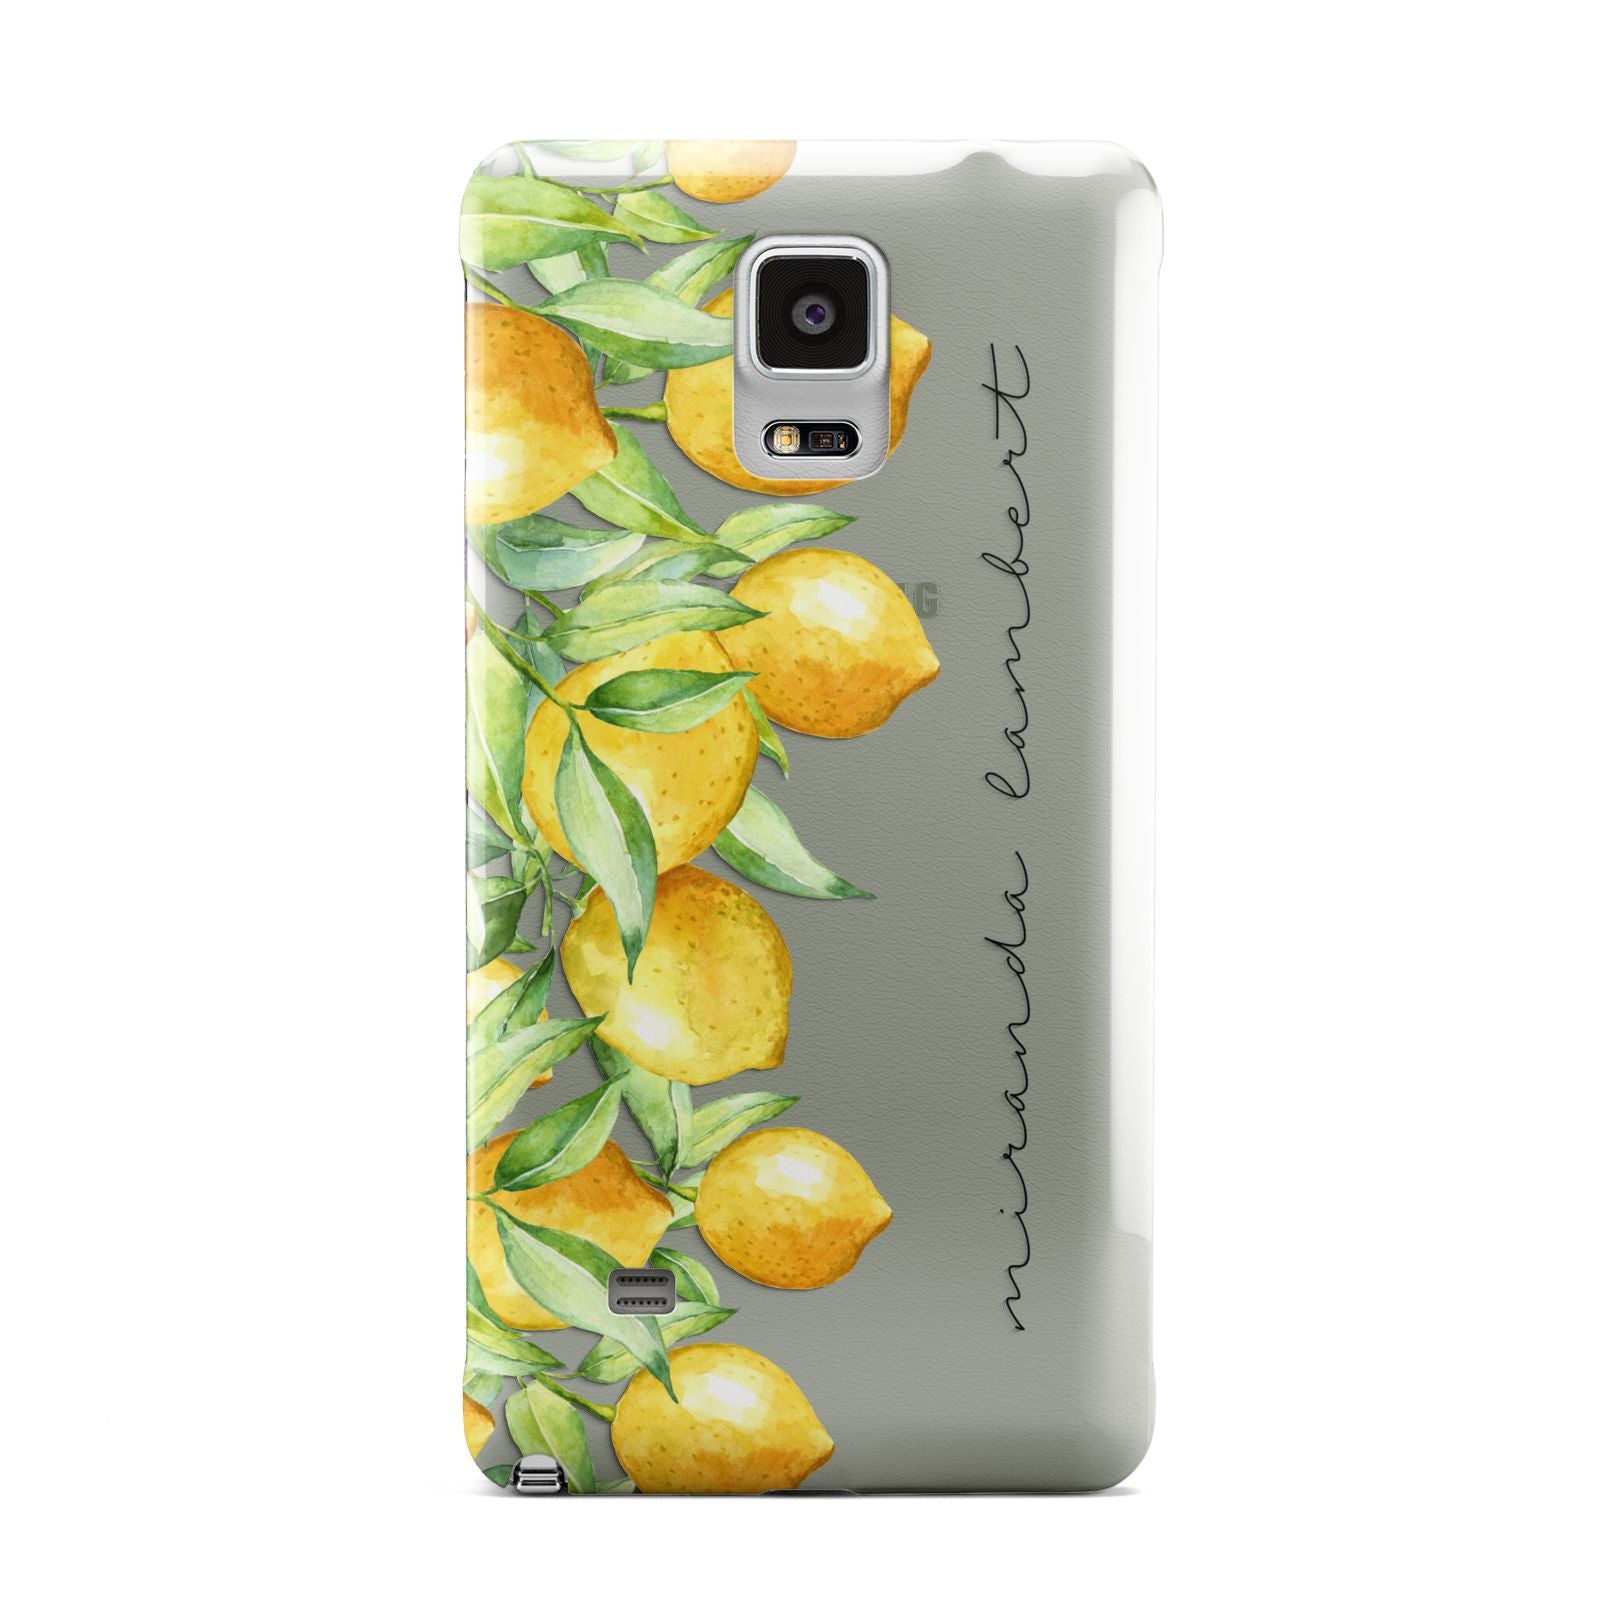 Personalised Lemon Bunches Samsung Galaxy Note 4 Case